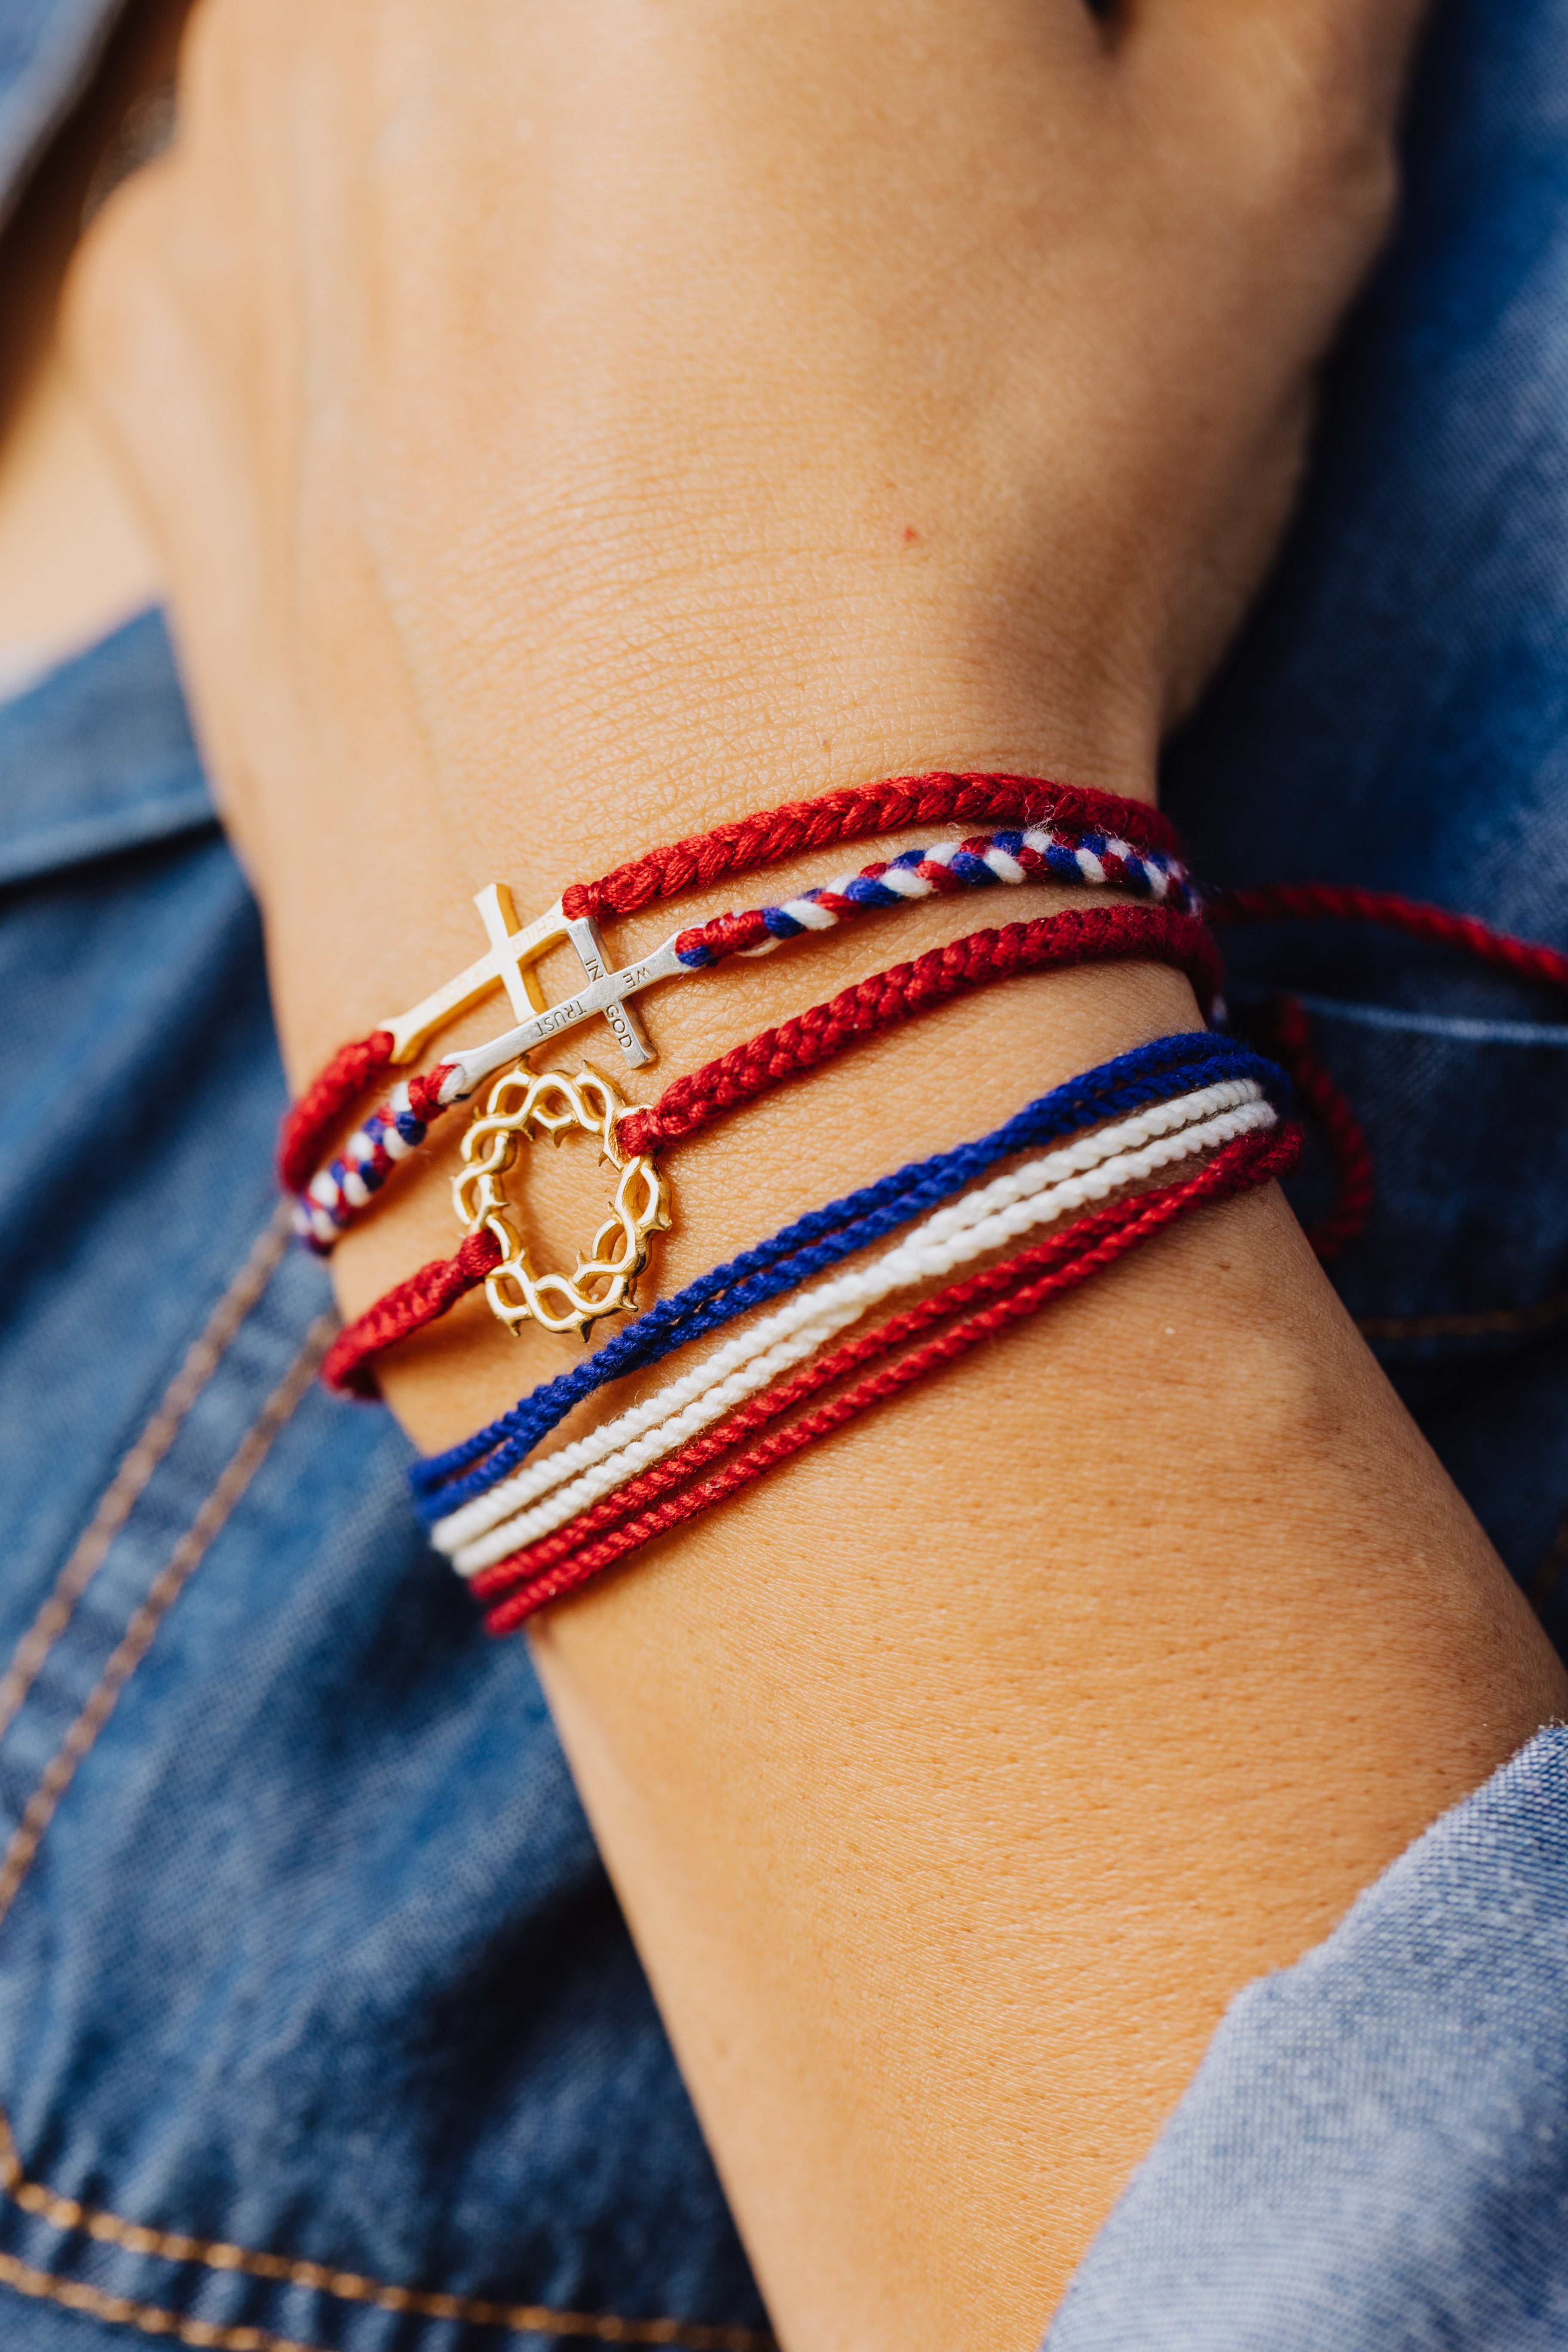 Designer Christian Jewelry model wearing Made 4 Ministry macrame bracelets in red, white, and blue cross bracelets, crown of thorns, and multi cord bracelets.